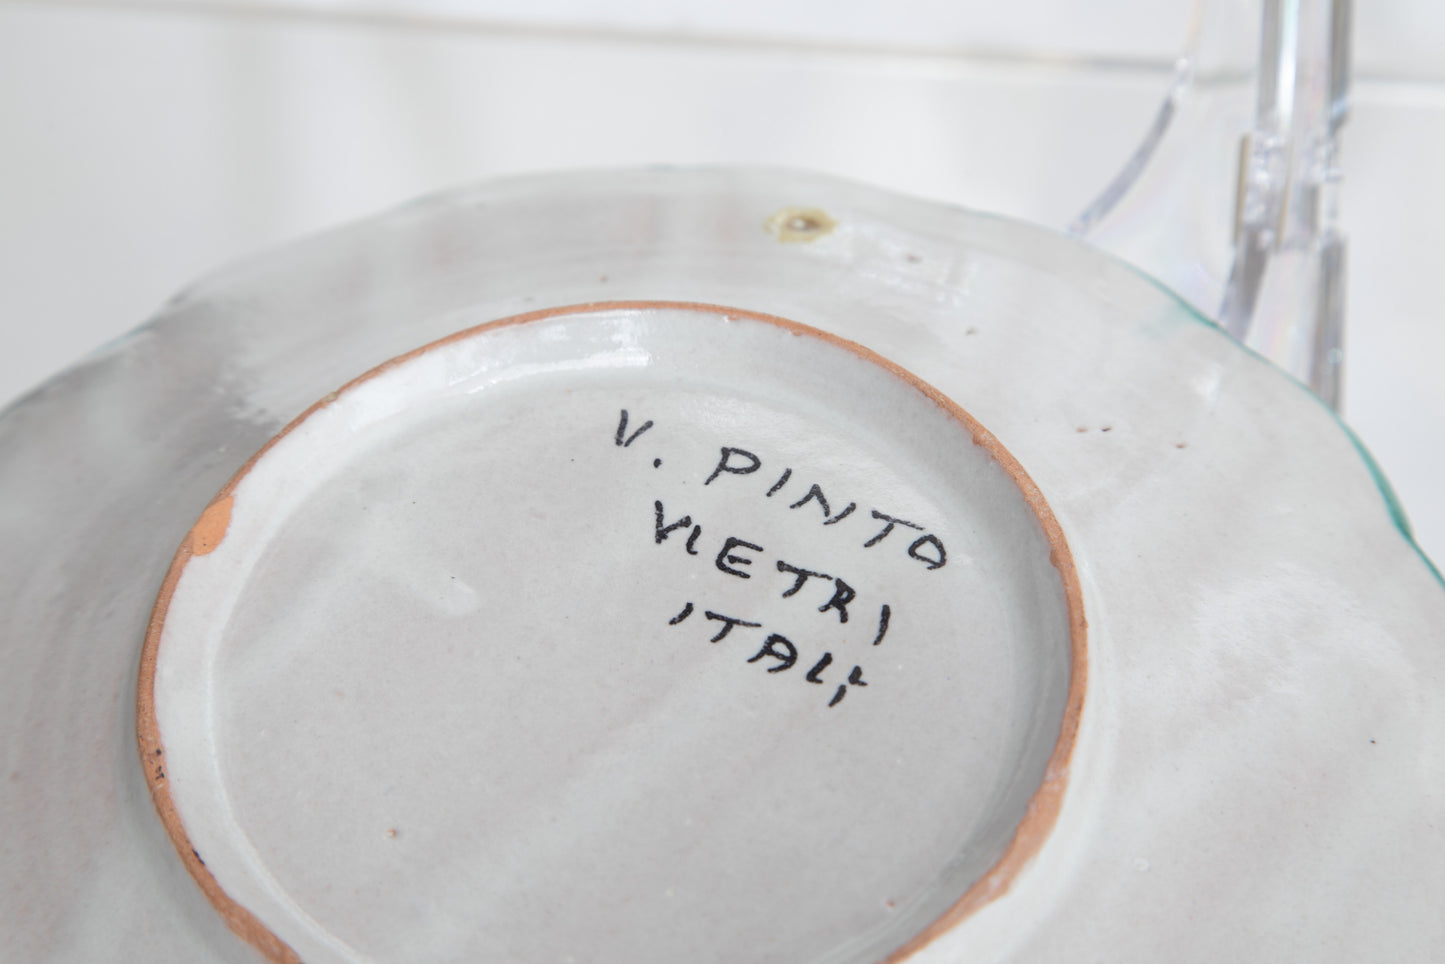 Vietri ceramic plate set from the 1950s by Vincenzo Pinto